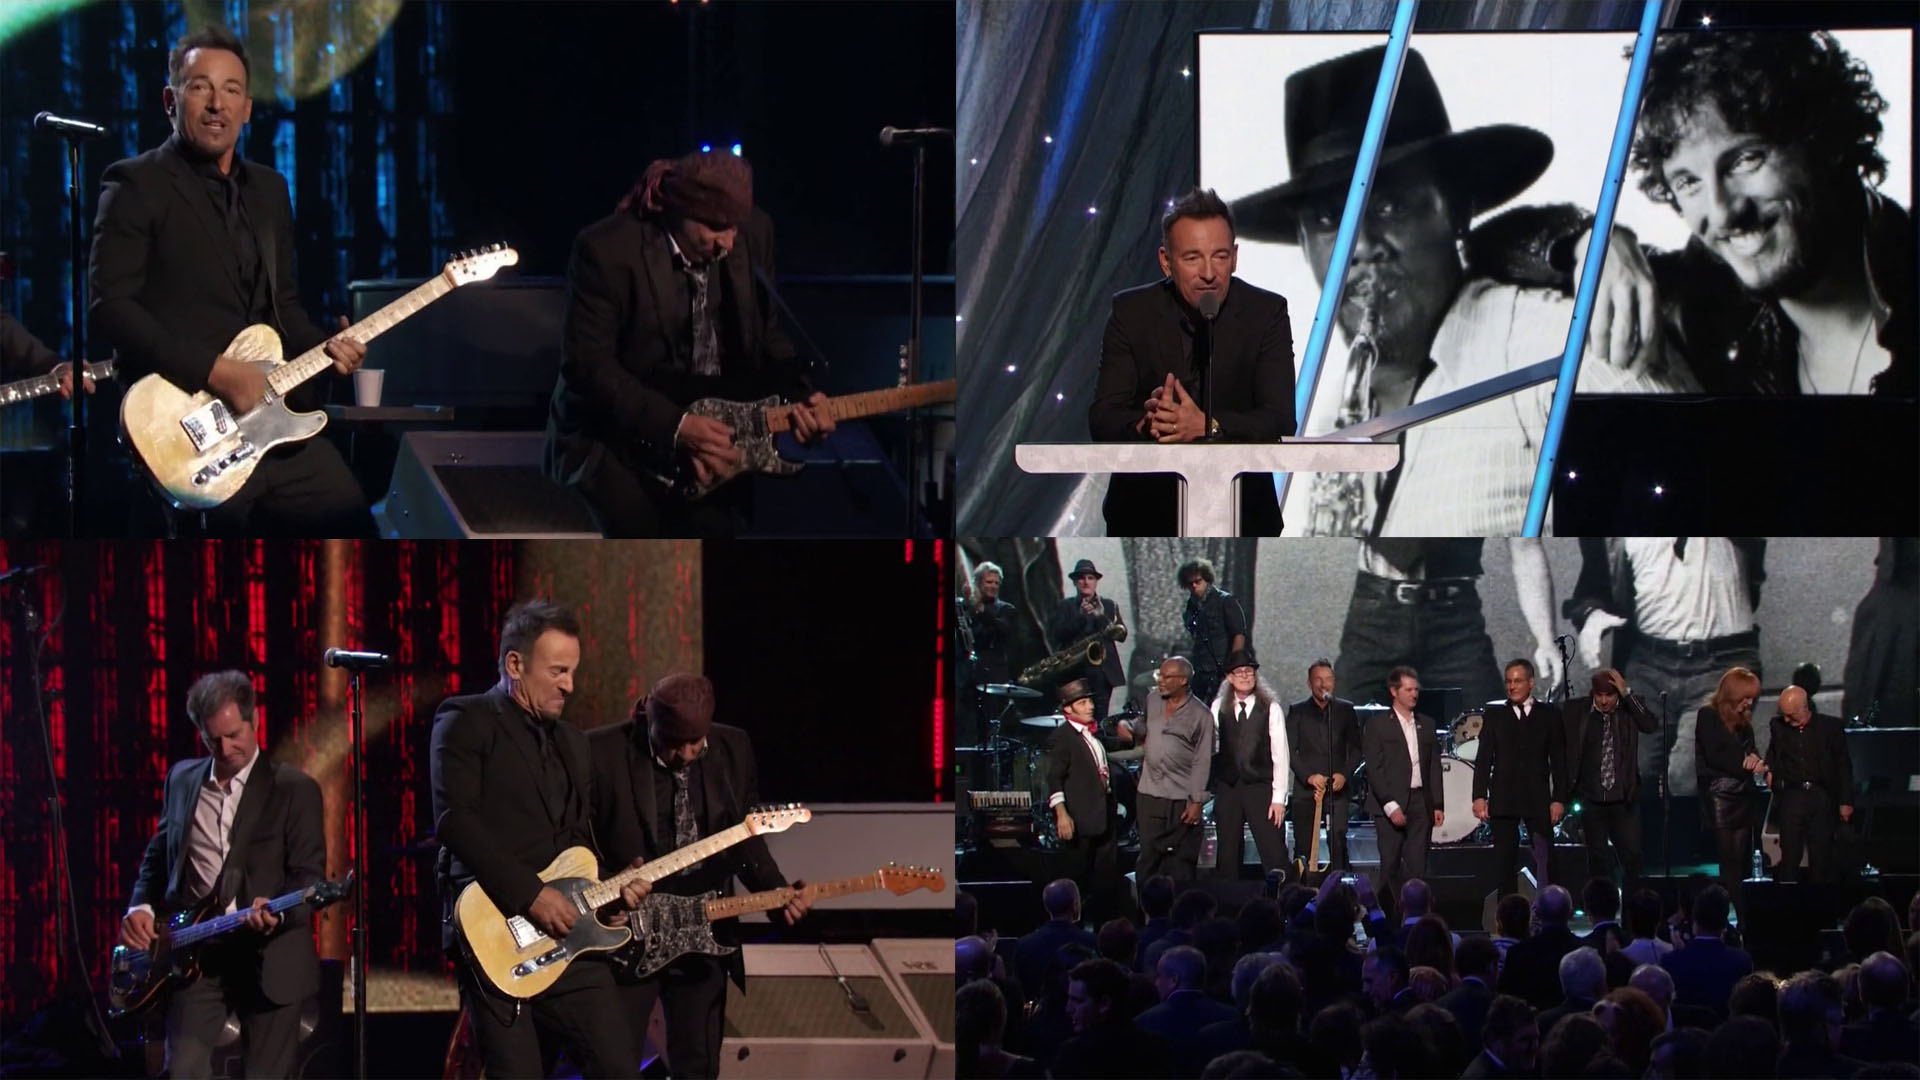 Hall of fame tiny. Rock and Roll Hall of Fame 2016. Rock and Roll Hall of Fame 2014. The 2017 Rock and Roll Hall of Fame Induction Ceremony.